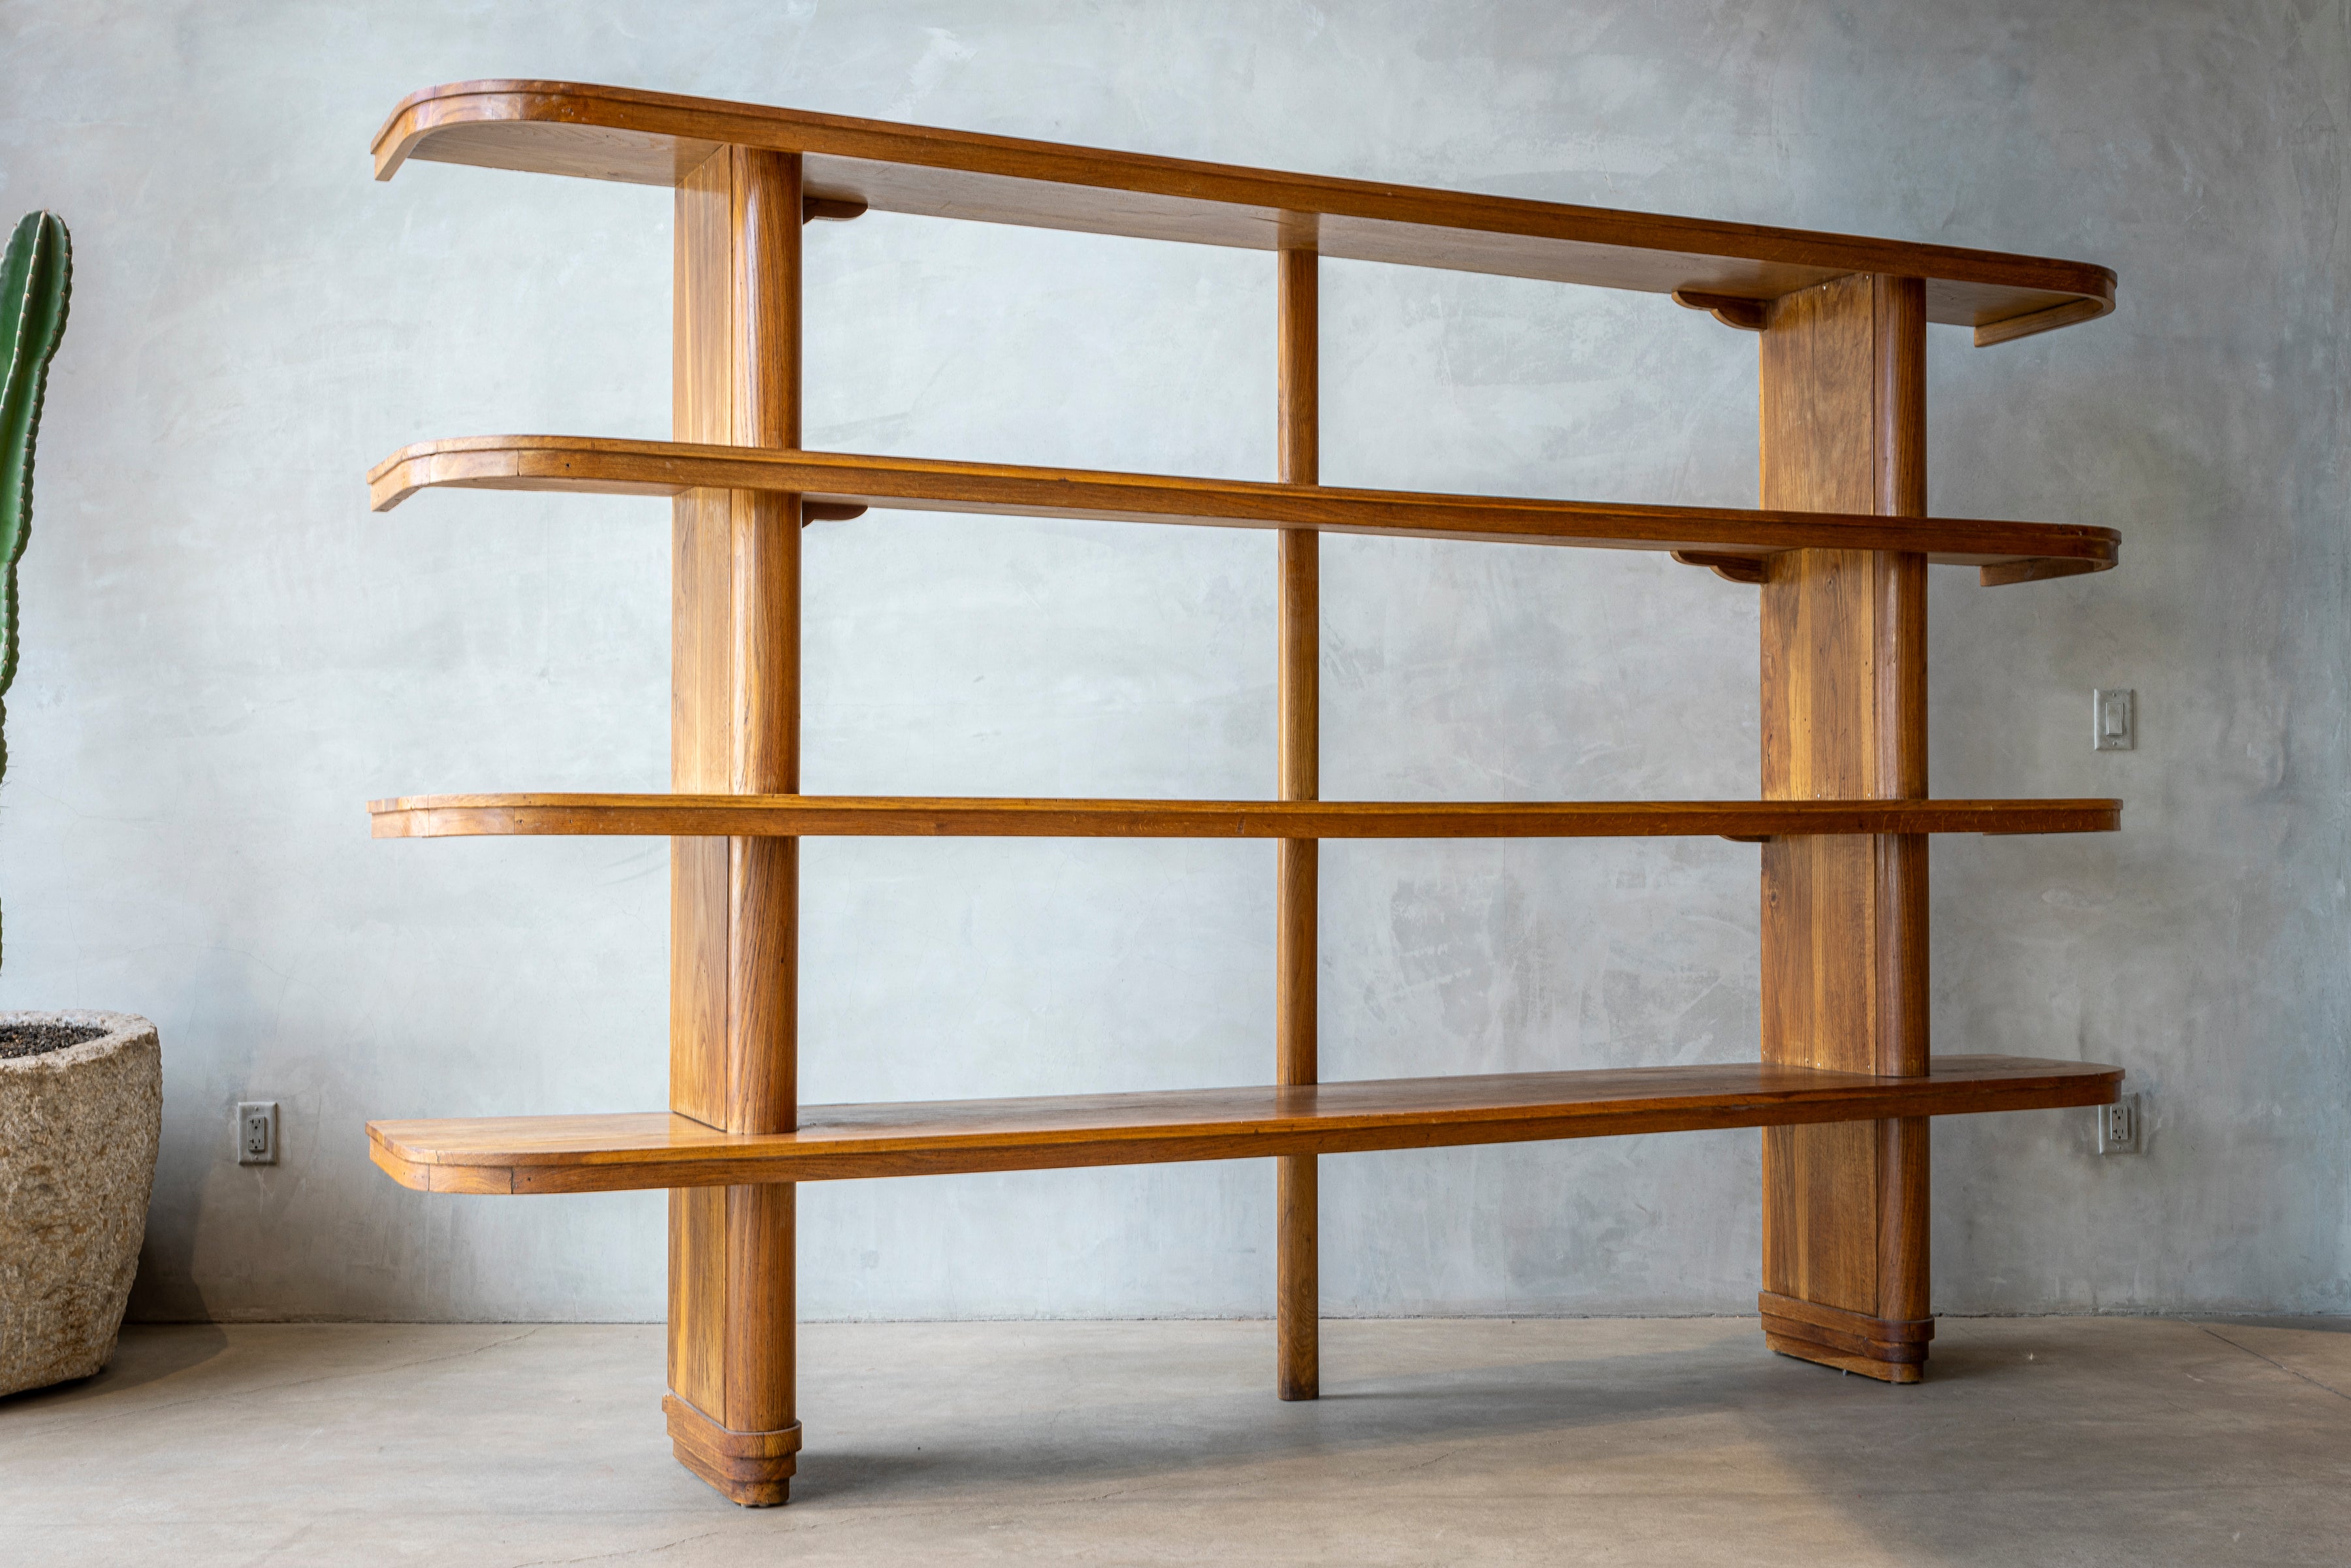 Massively large Italian bookcase - Italy, 1960s
Impressive in scale and construction. 
Wonderful rich oak patina with curved ends